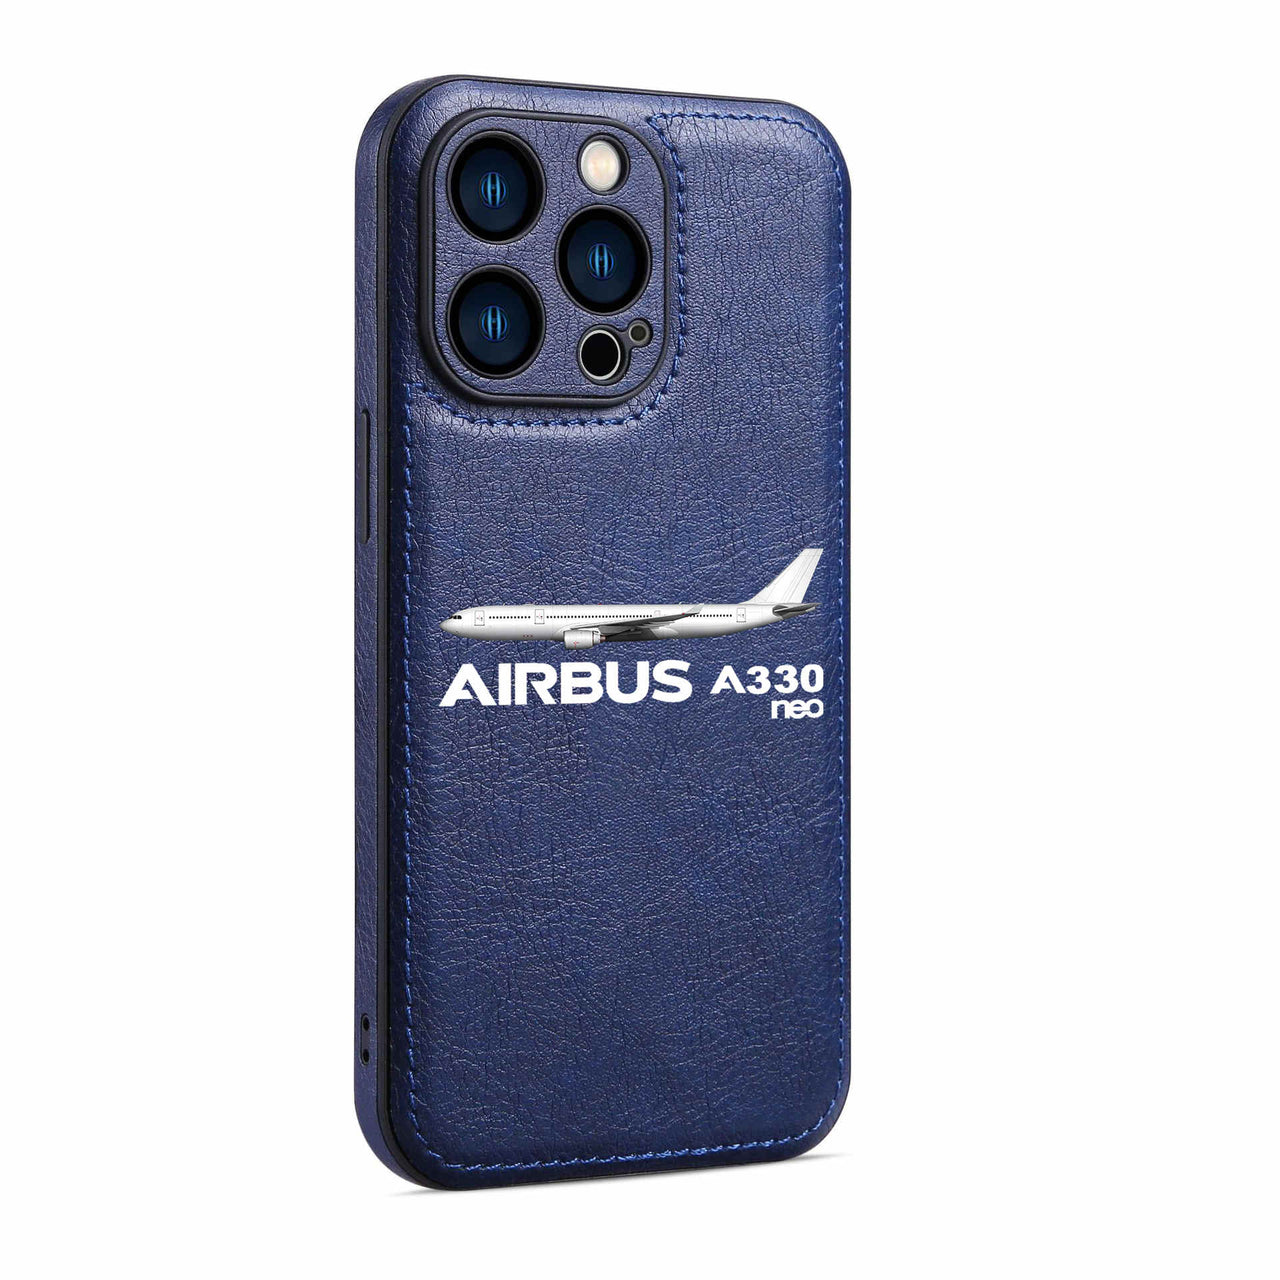 The Airbus A330neo Designed Leather iPhone Cases